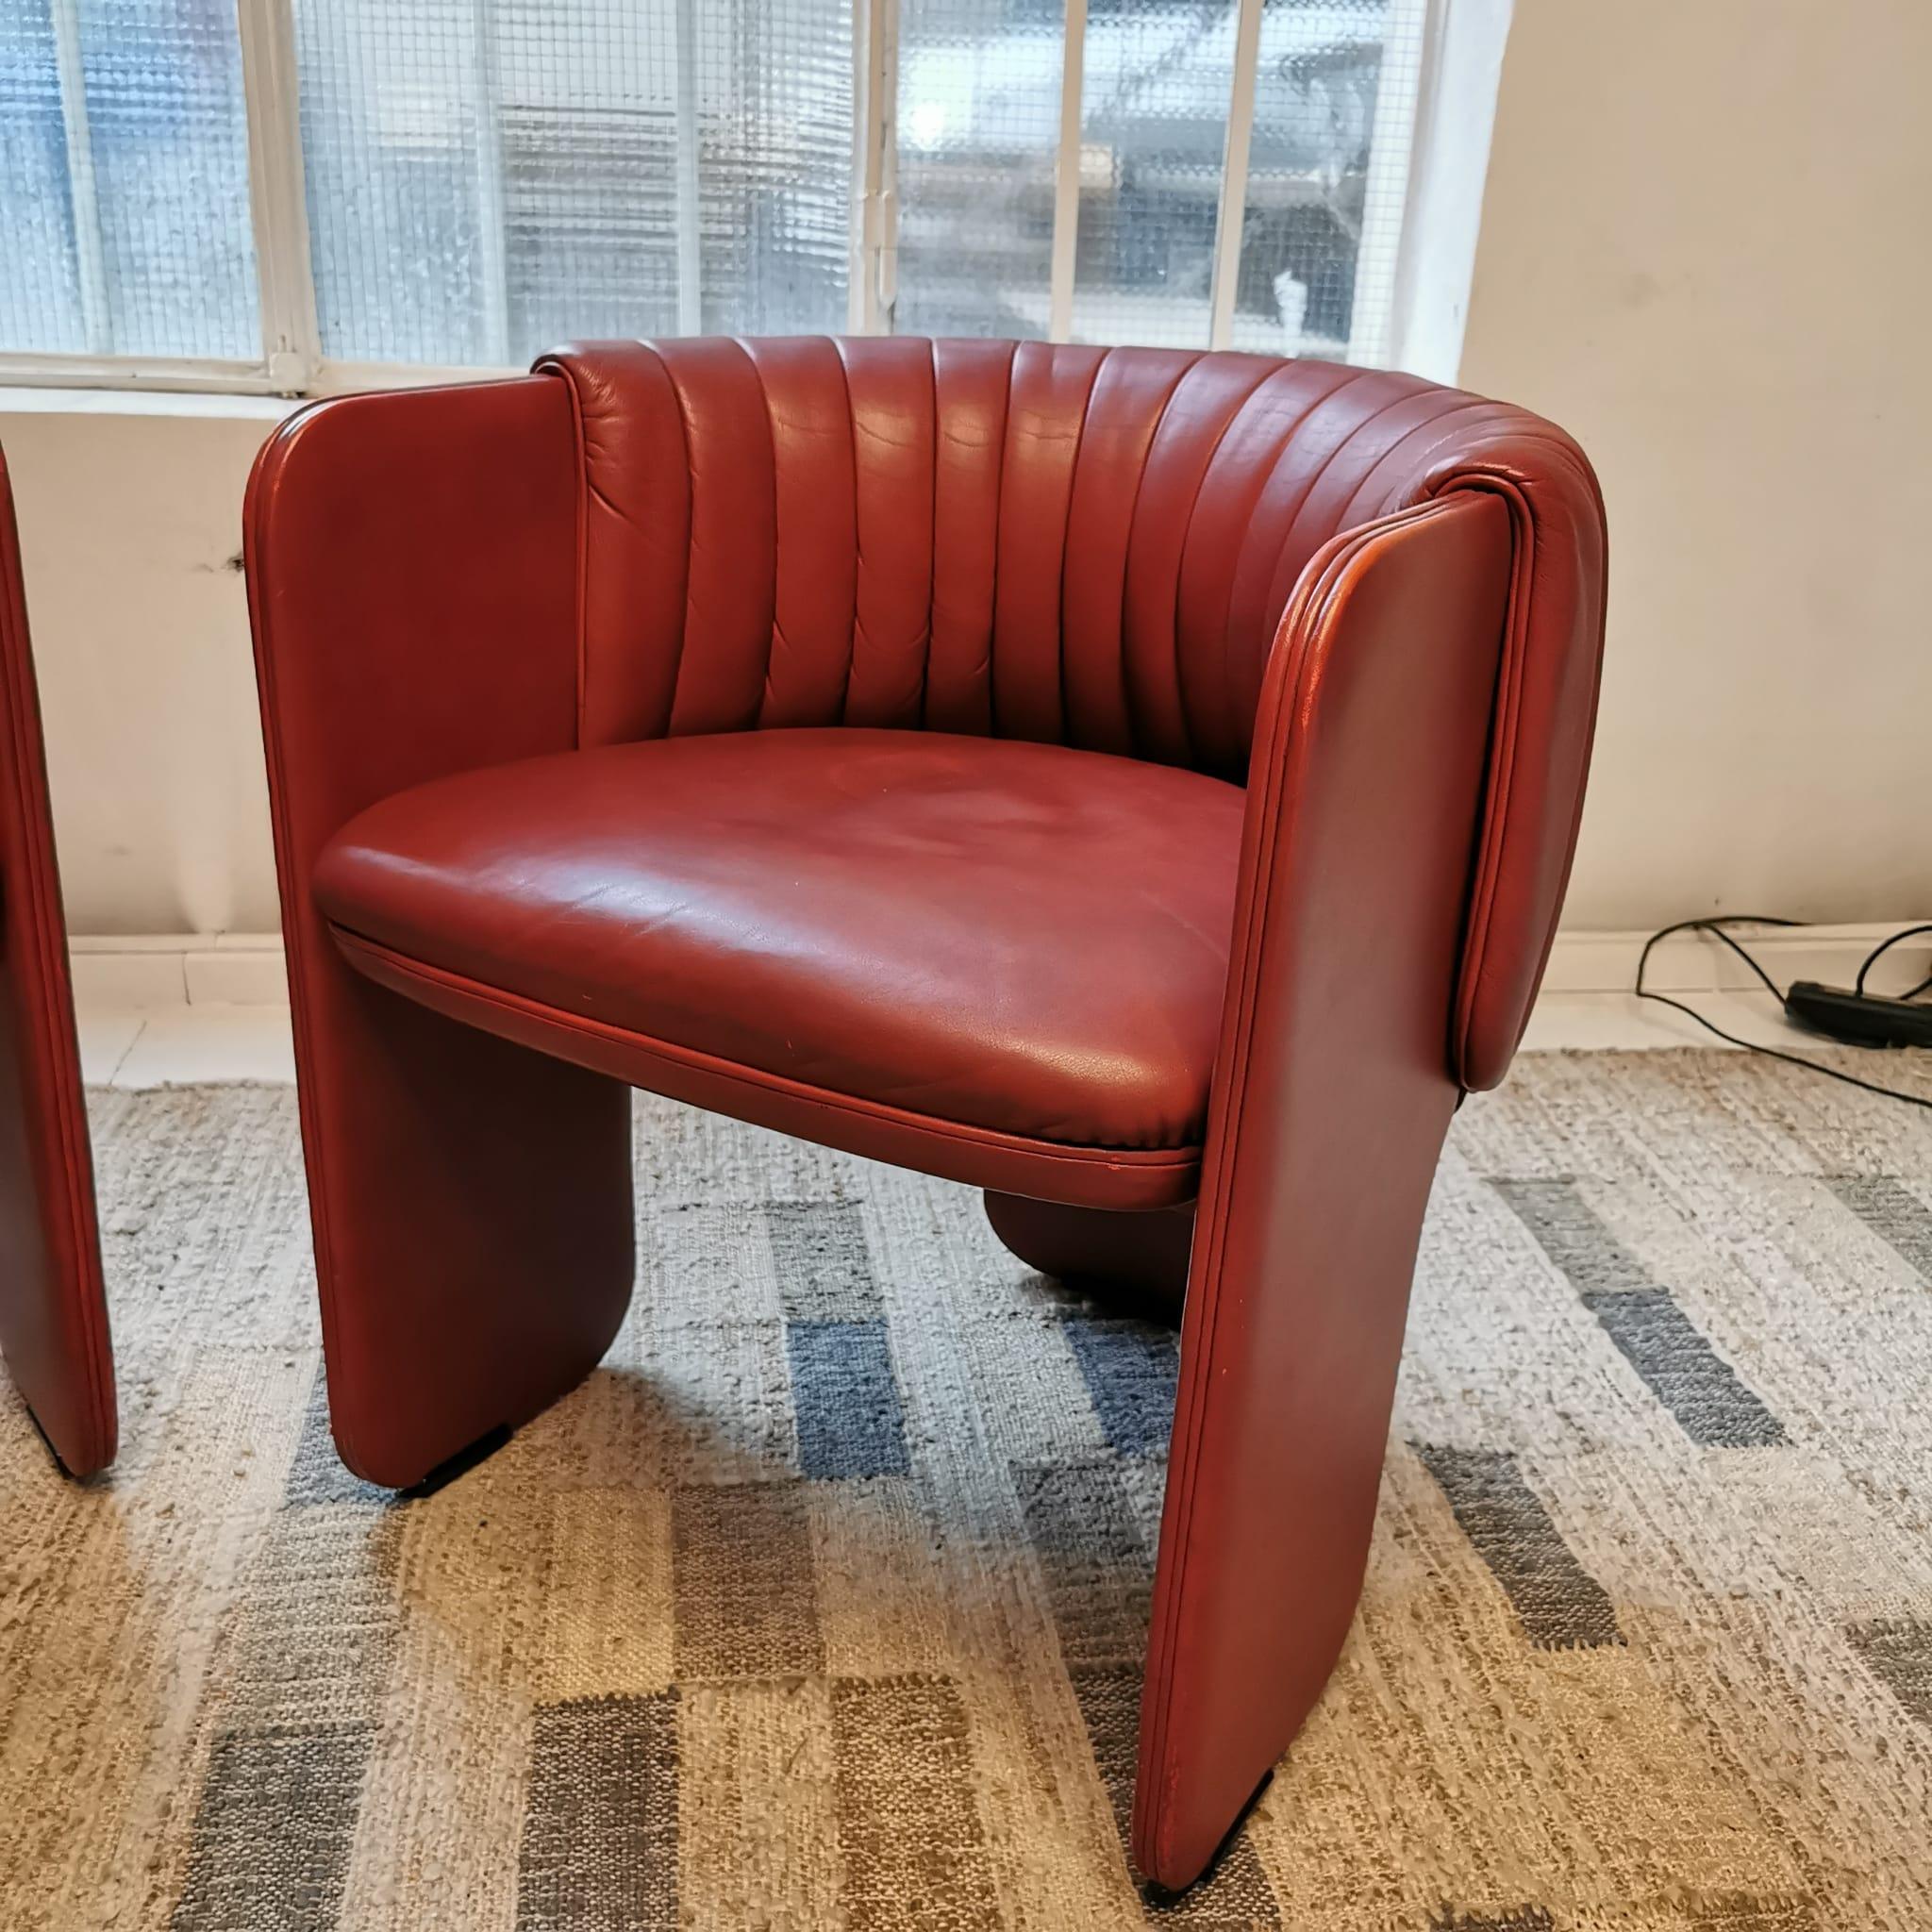 Pair of vintage armchairs entirely in leather designed in the 70s by Luigi Massoni for Poltrona Frau. The armchairs are in red leather and are in excellent condition.